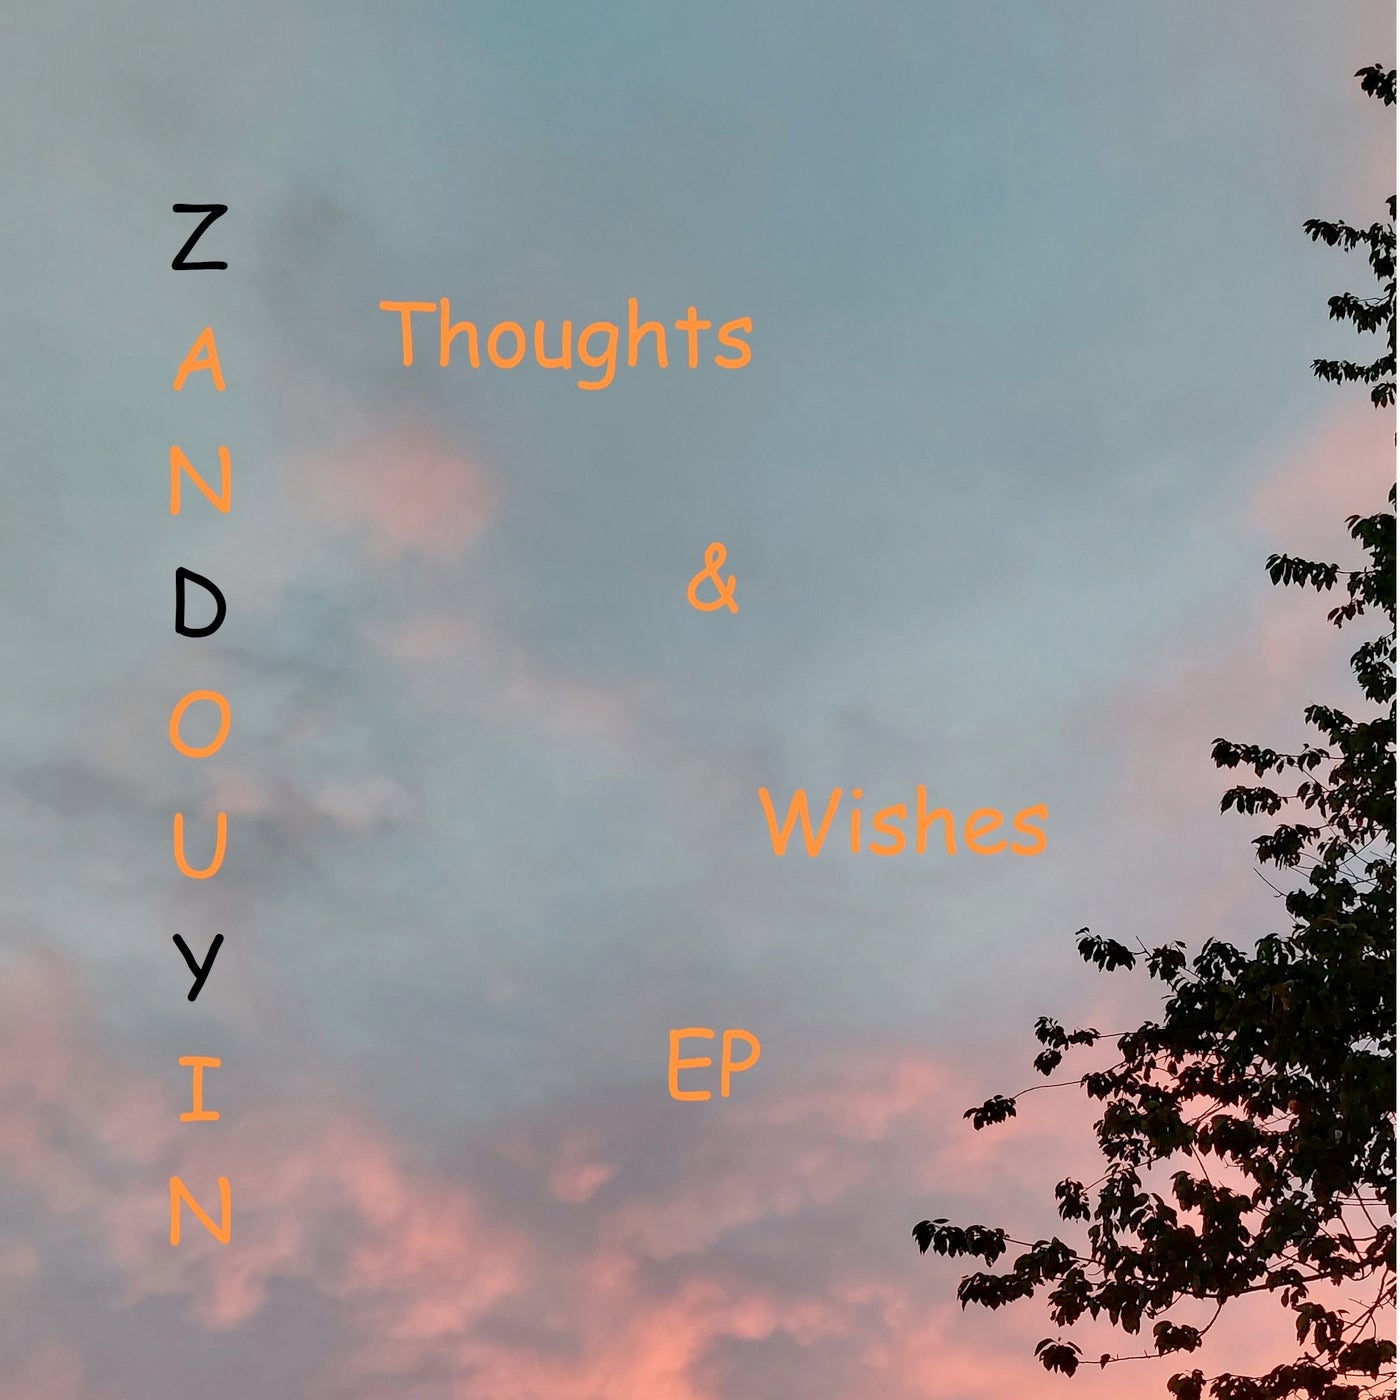 Thoughts & Wishes EP